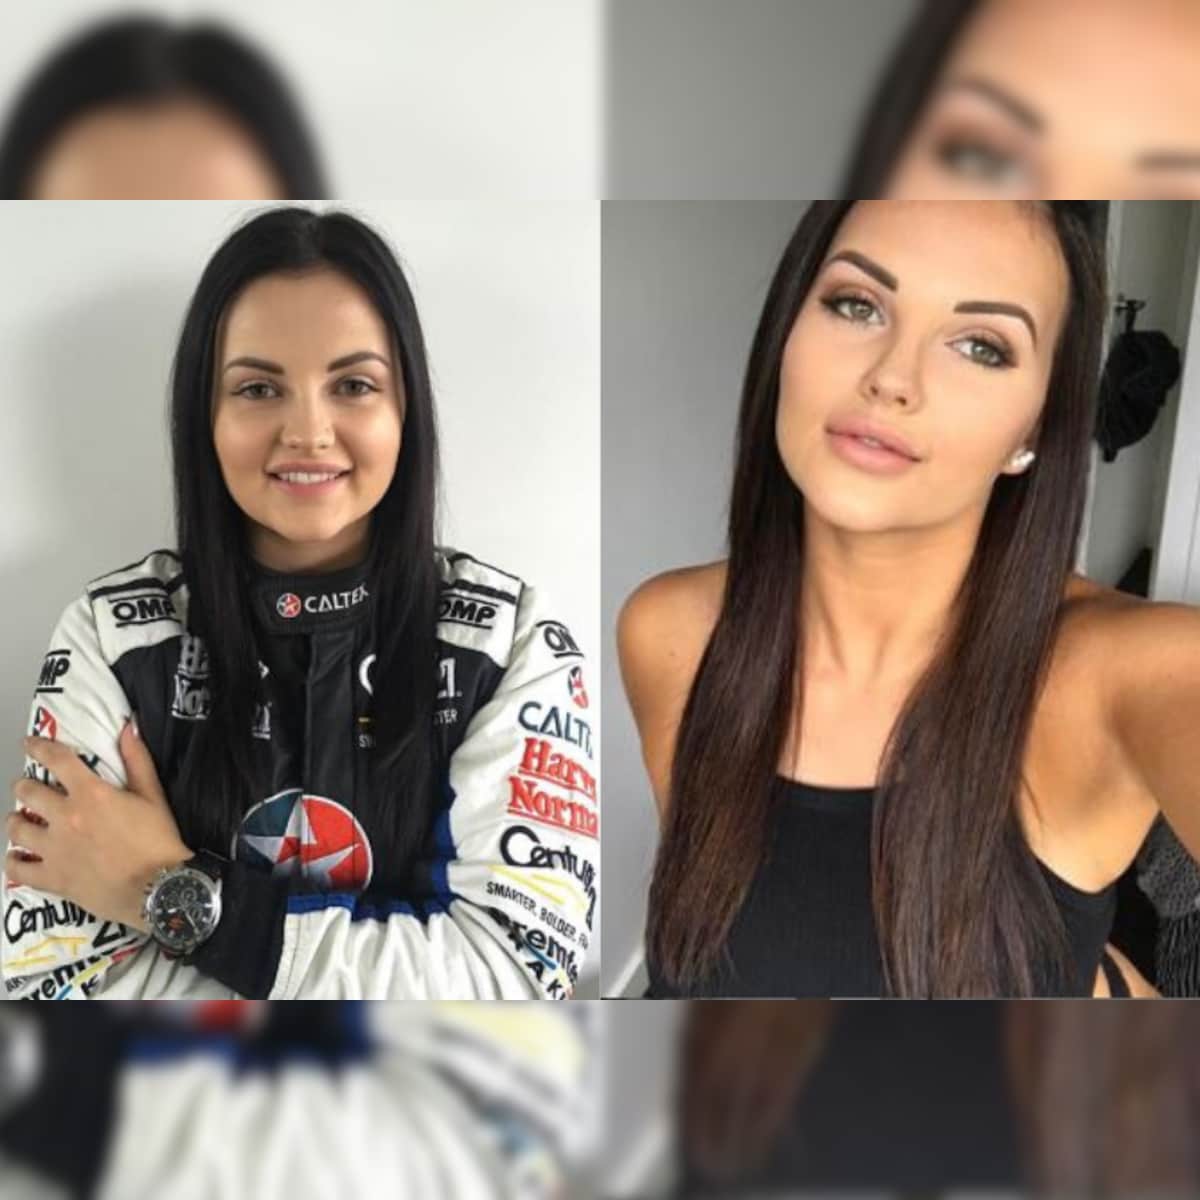 Xxx Video Of Priyanka Chopra S Suhagraat - Supercars Racer Renee Gracie is Enjoying Career Switch to Selling Adult  Videos as it Gives Her 'Good Money'